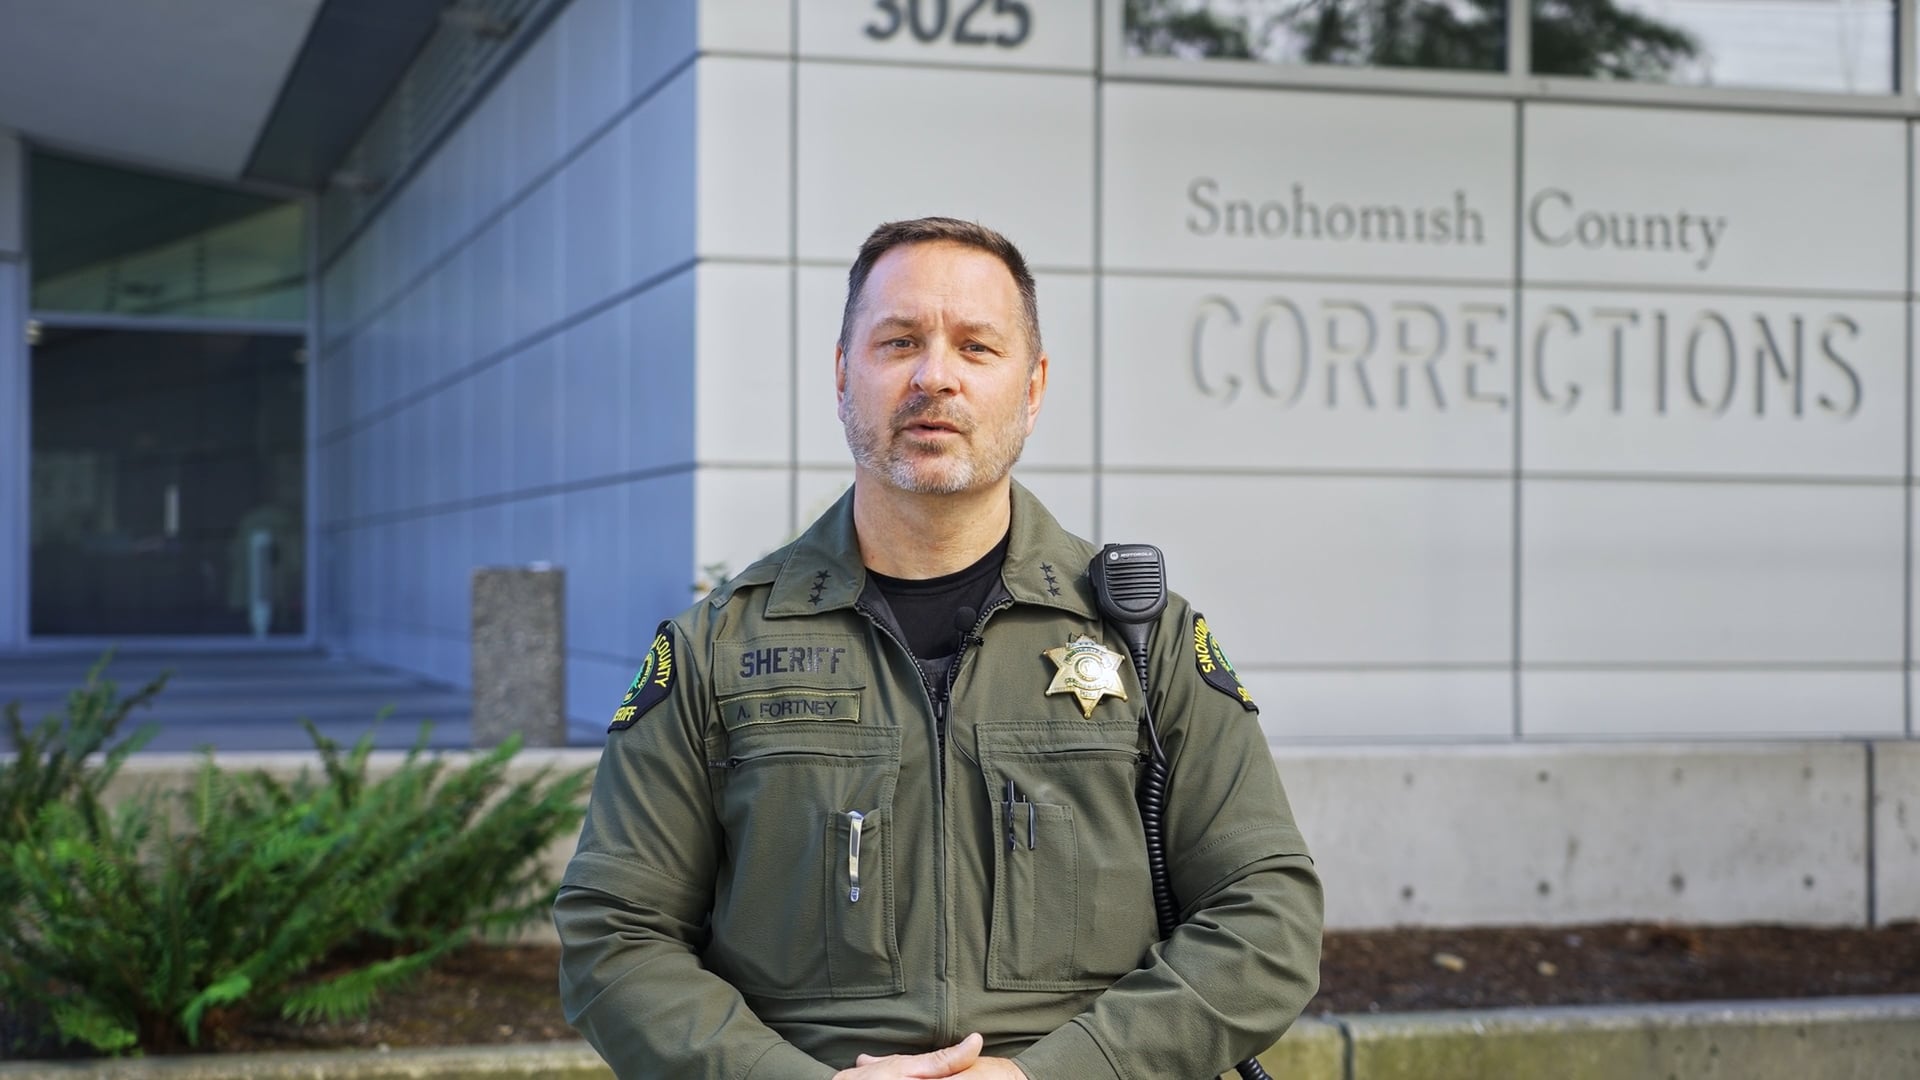 Snohomish County Sheriff - Public Safety Video